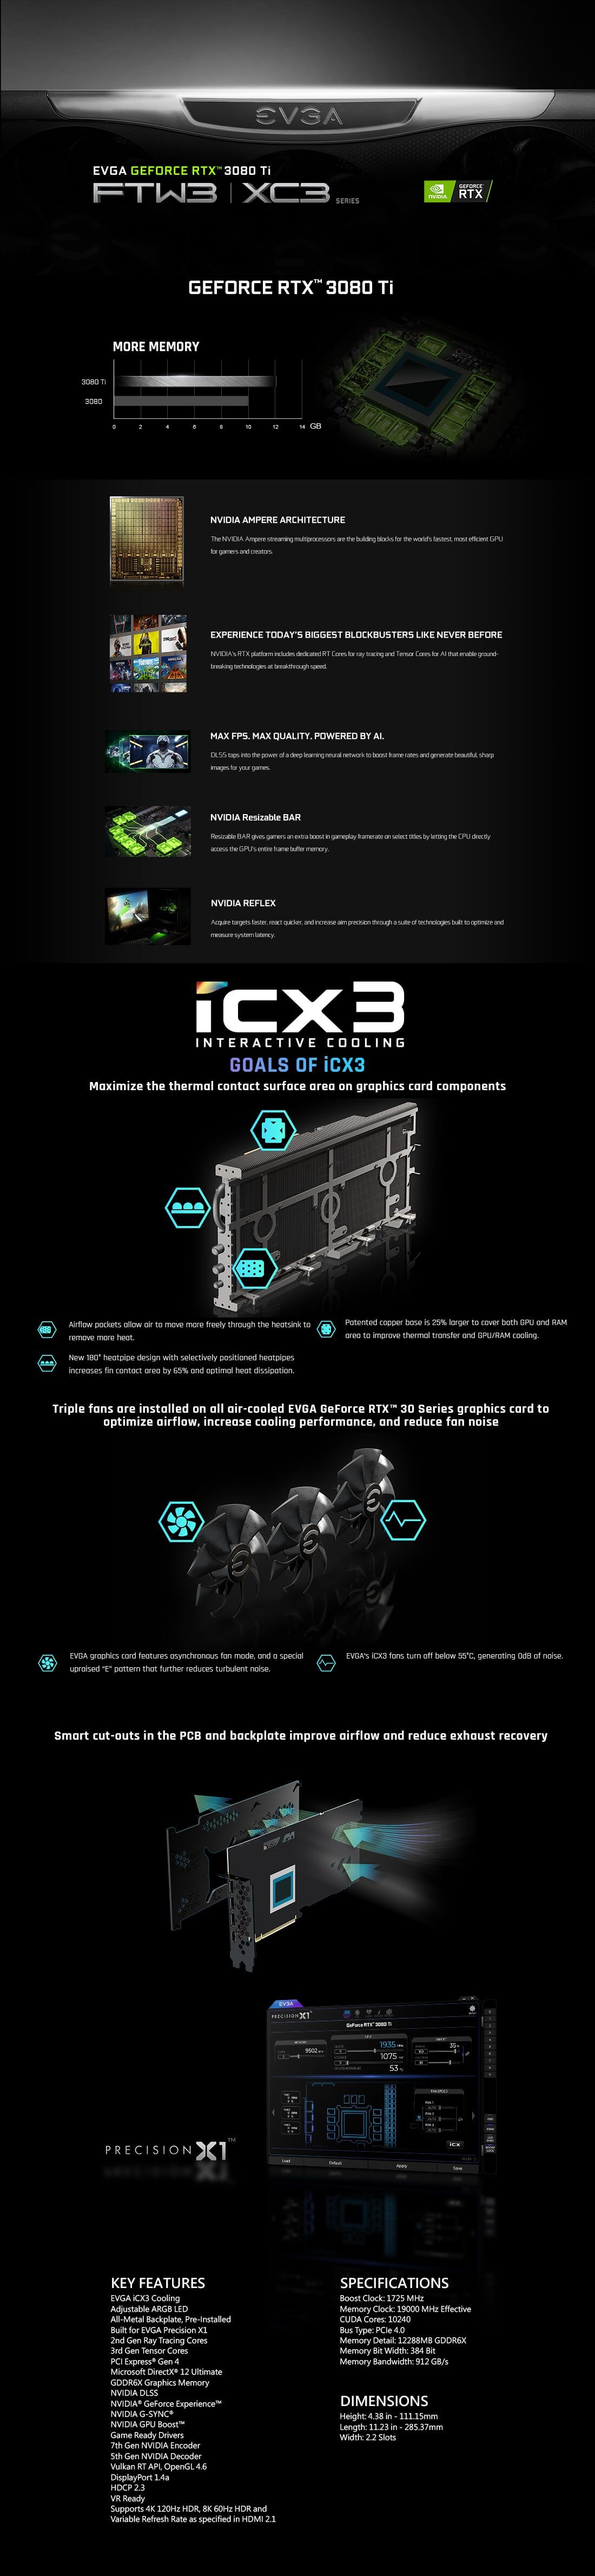 A large marketing image providing additional information about the product EVGA GeForce RTX 3080 Ti XC3 ULTRA 12GB GDDR6X - Additional alt info not provided